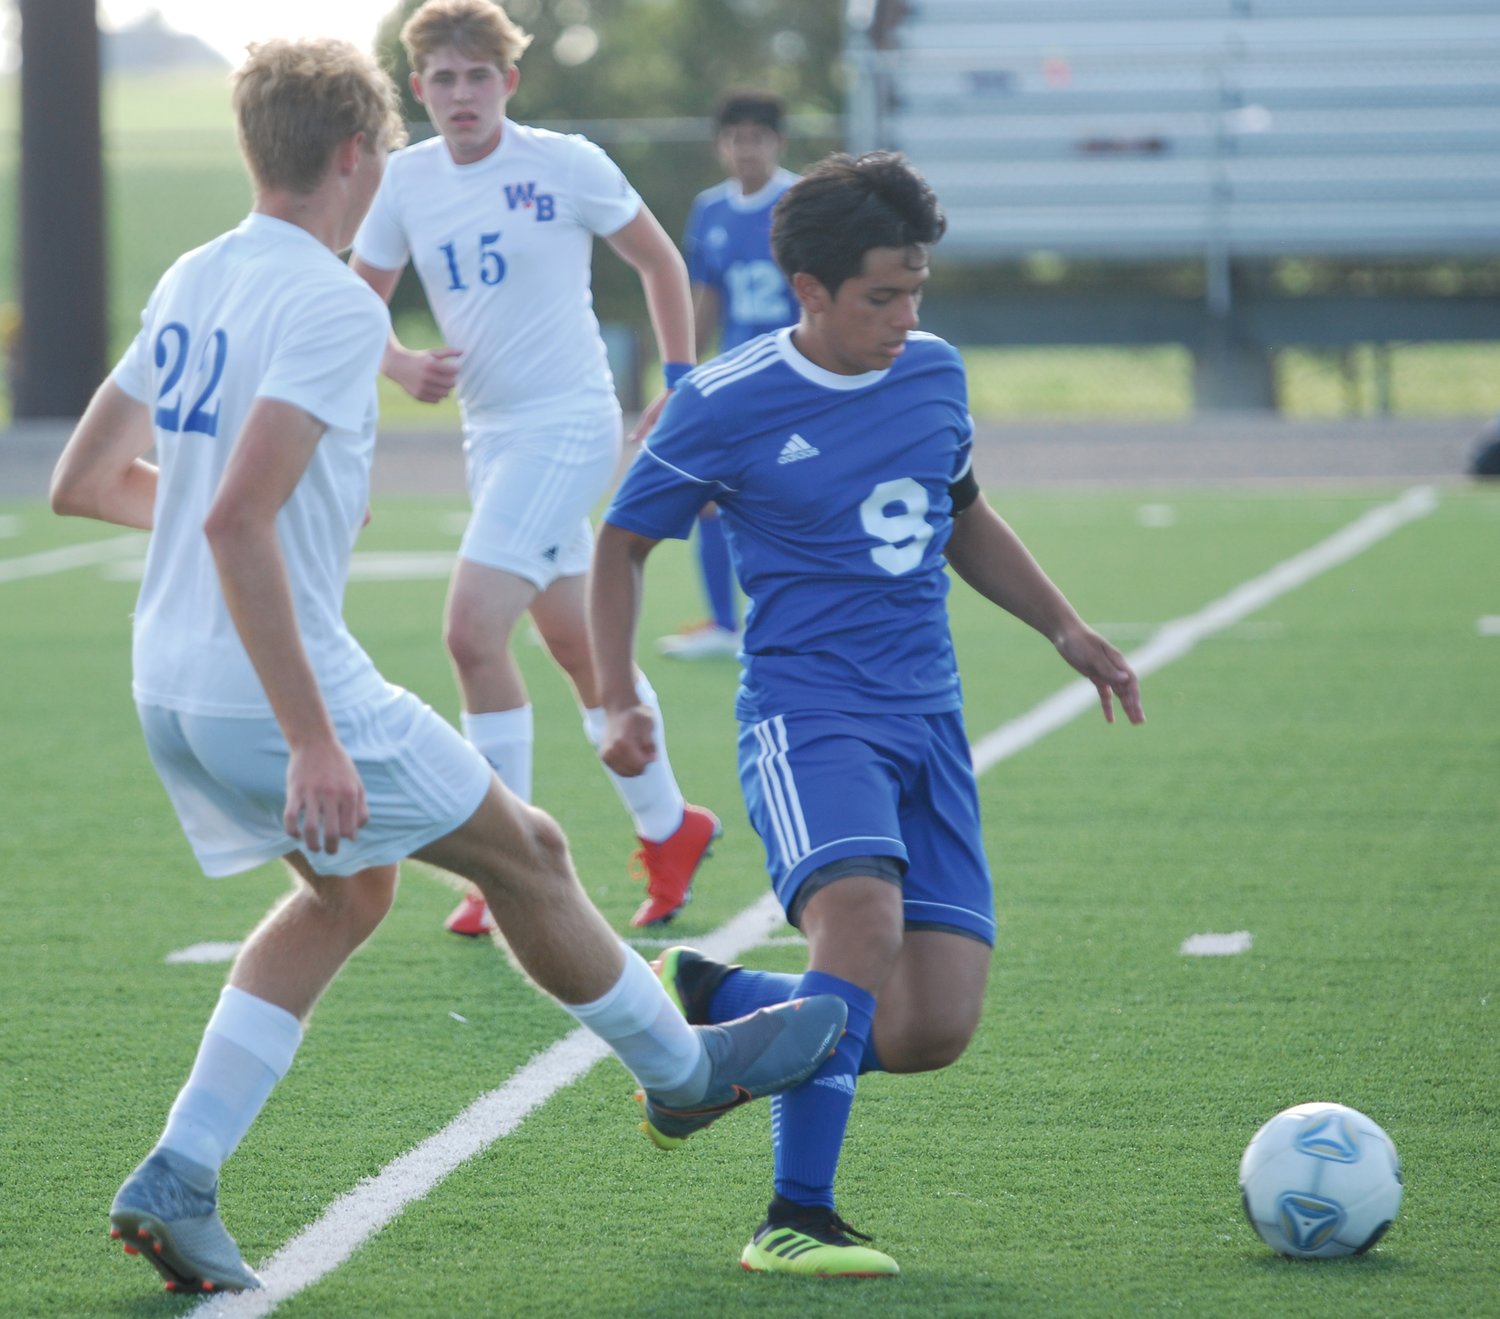 Kevin Barrera-Chinchilla led Crawfordsville to a 6-0 season-opening win over Western Boone on Tuesday night with two goals.